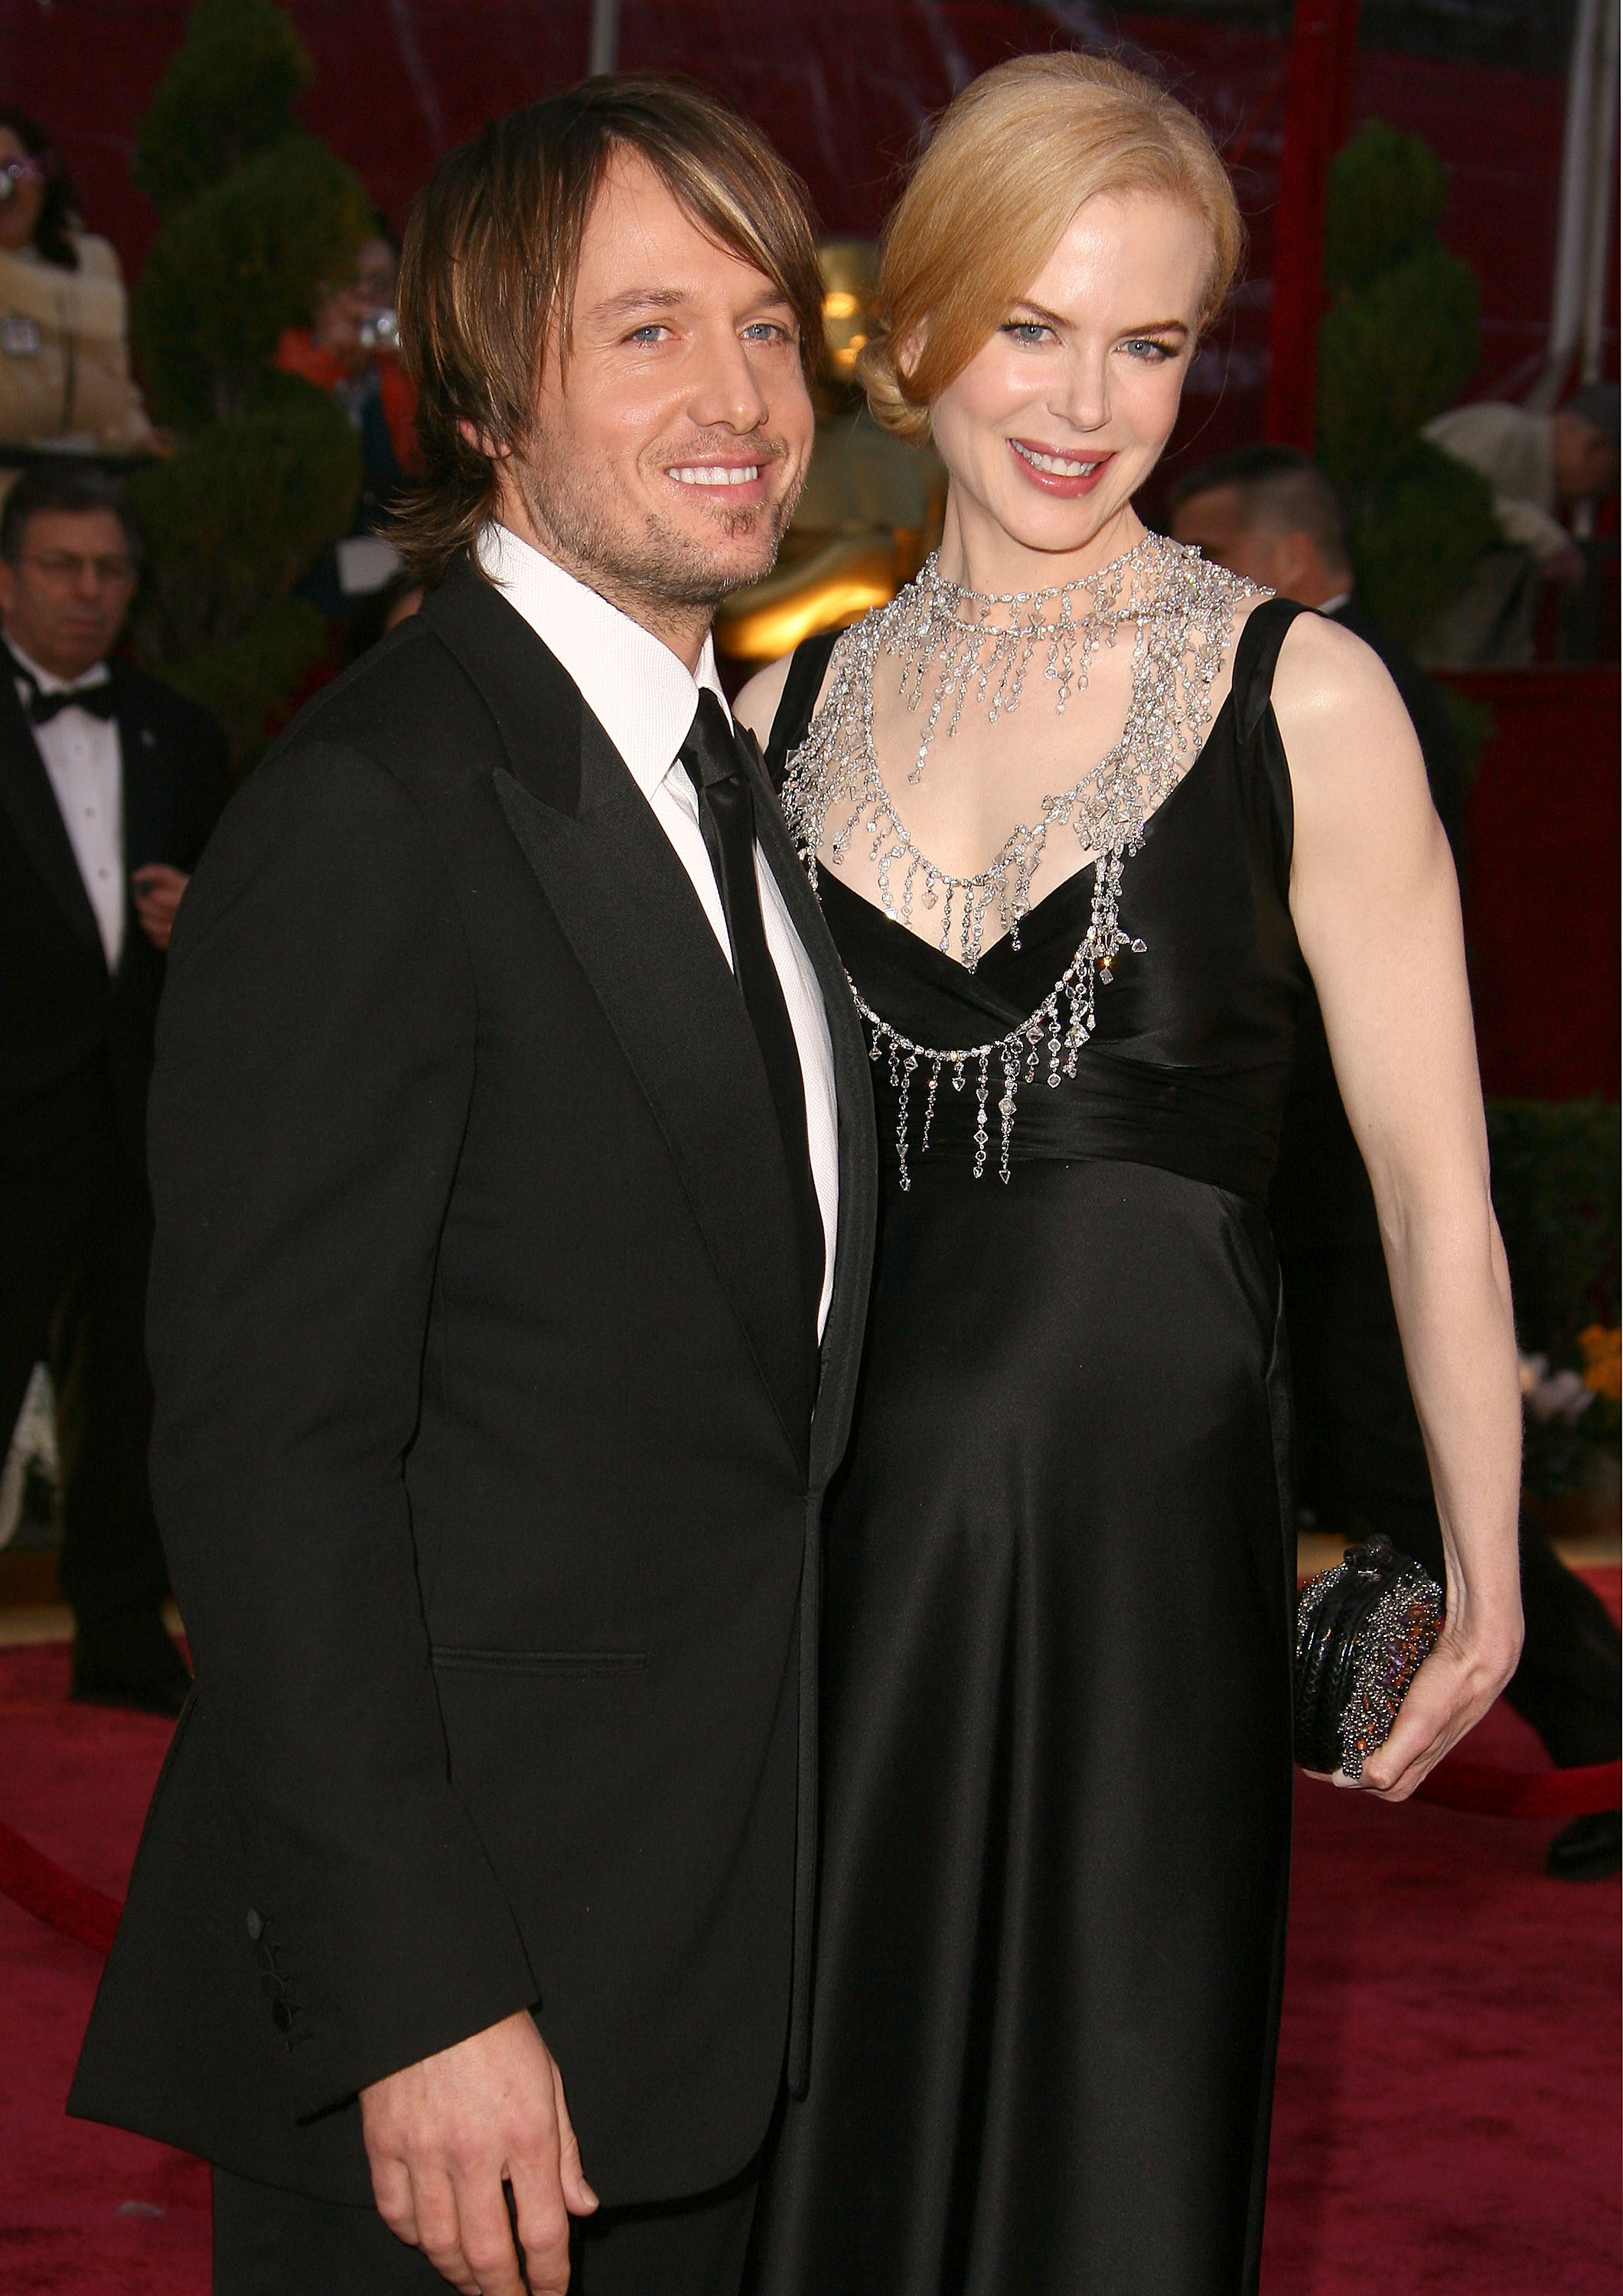 Keith Urban and Nicole Kidman at the 80th Annual Academy Awards on February 24, 2008, in Los Angeles, California. | Source: Getty Images